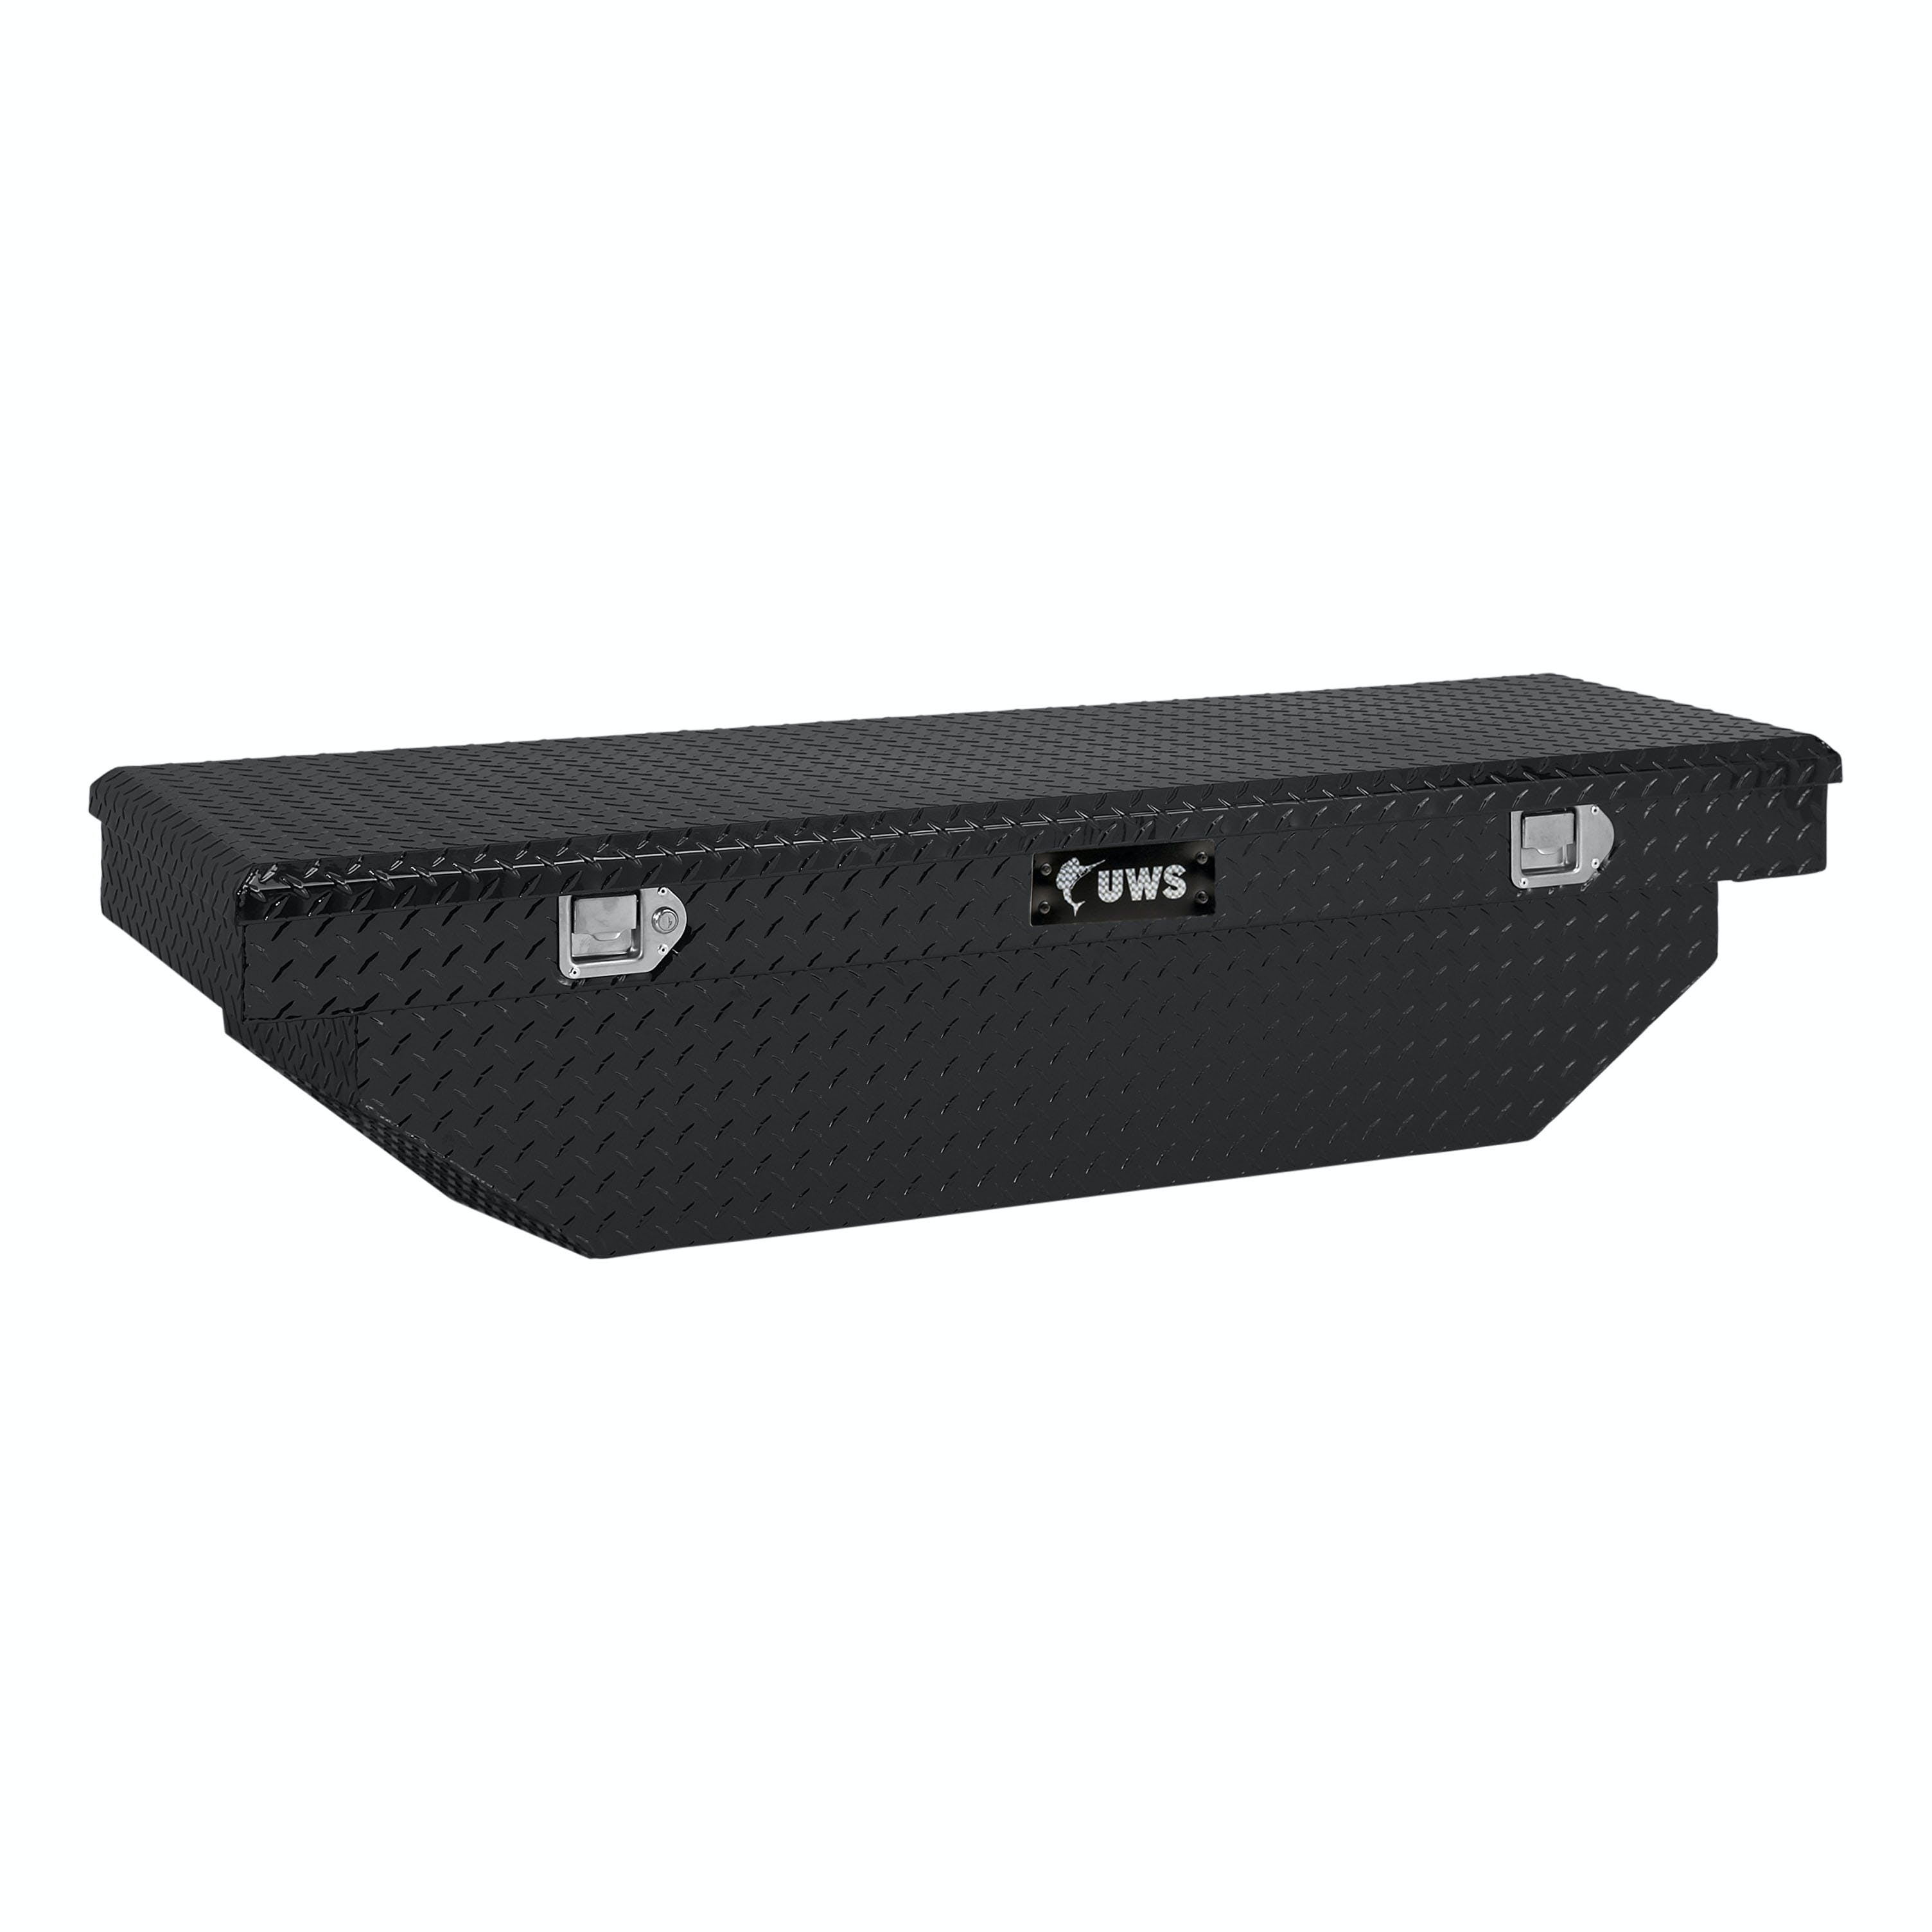 UWS EC10282 63 in. Angled Crossover Truck Tool Box